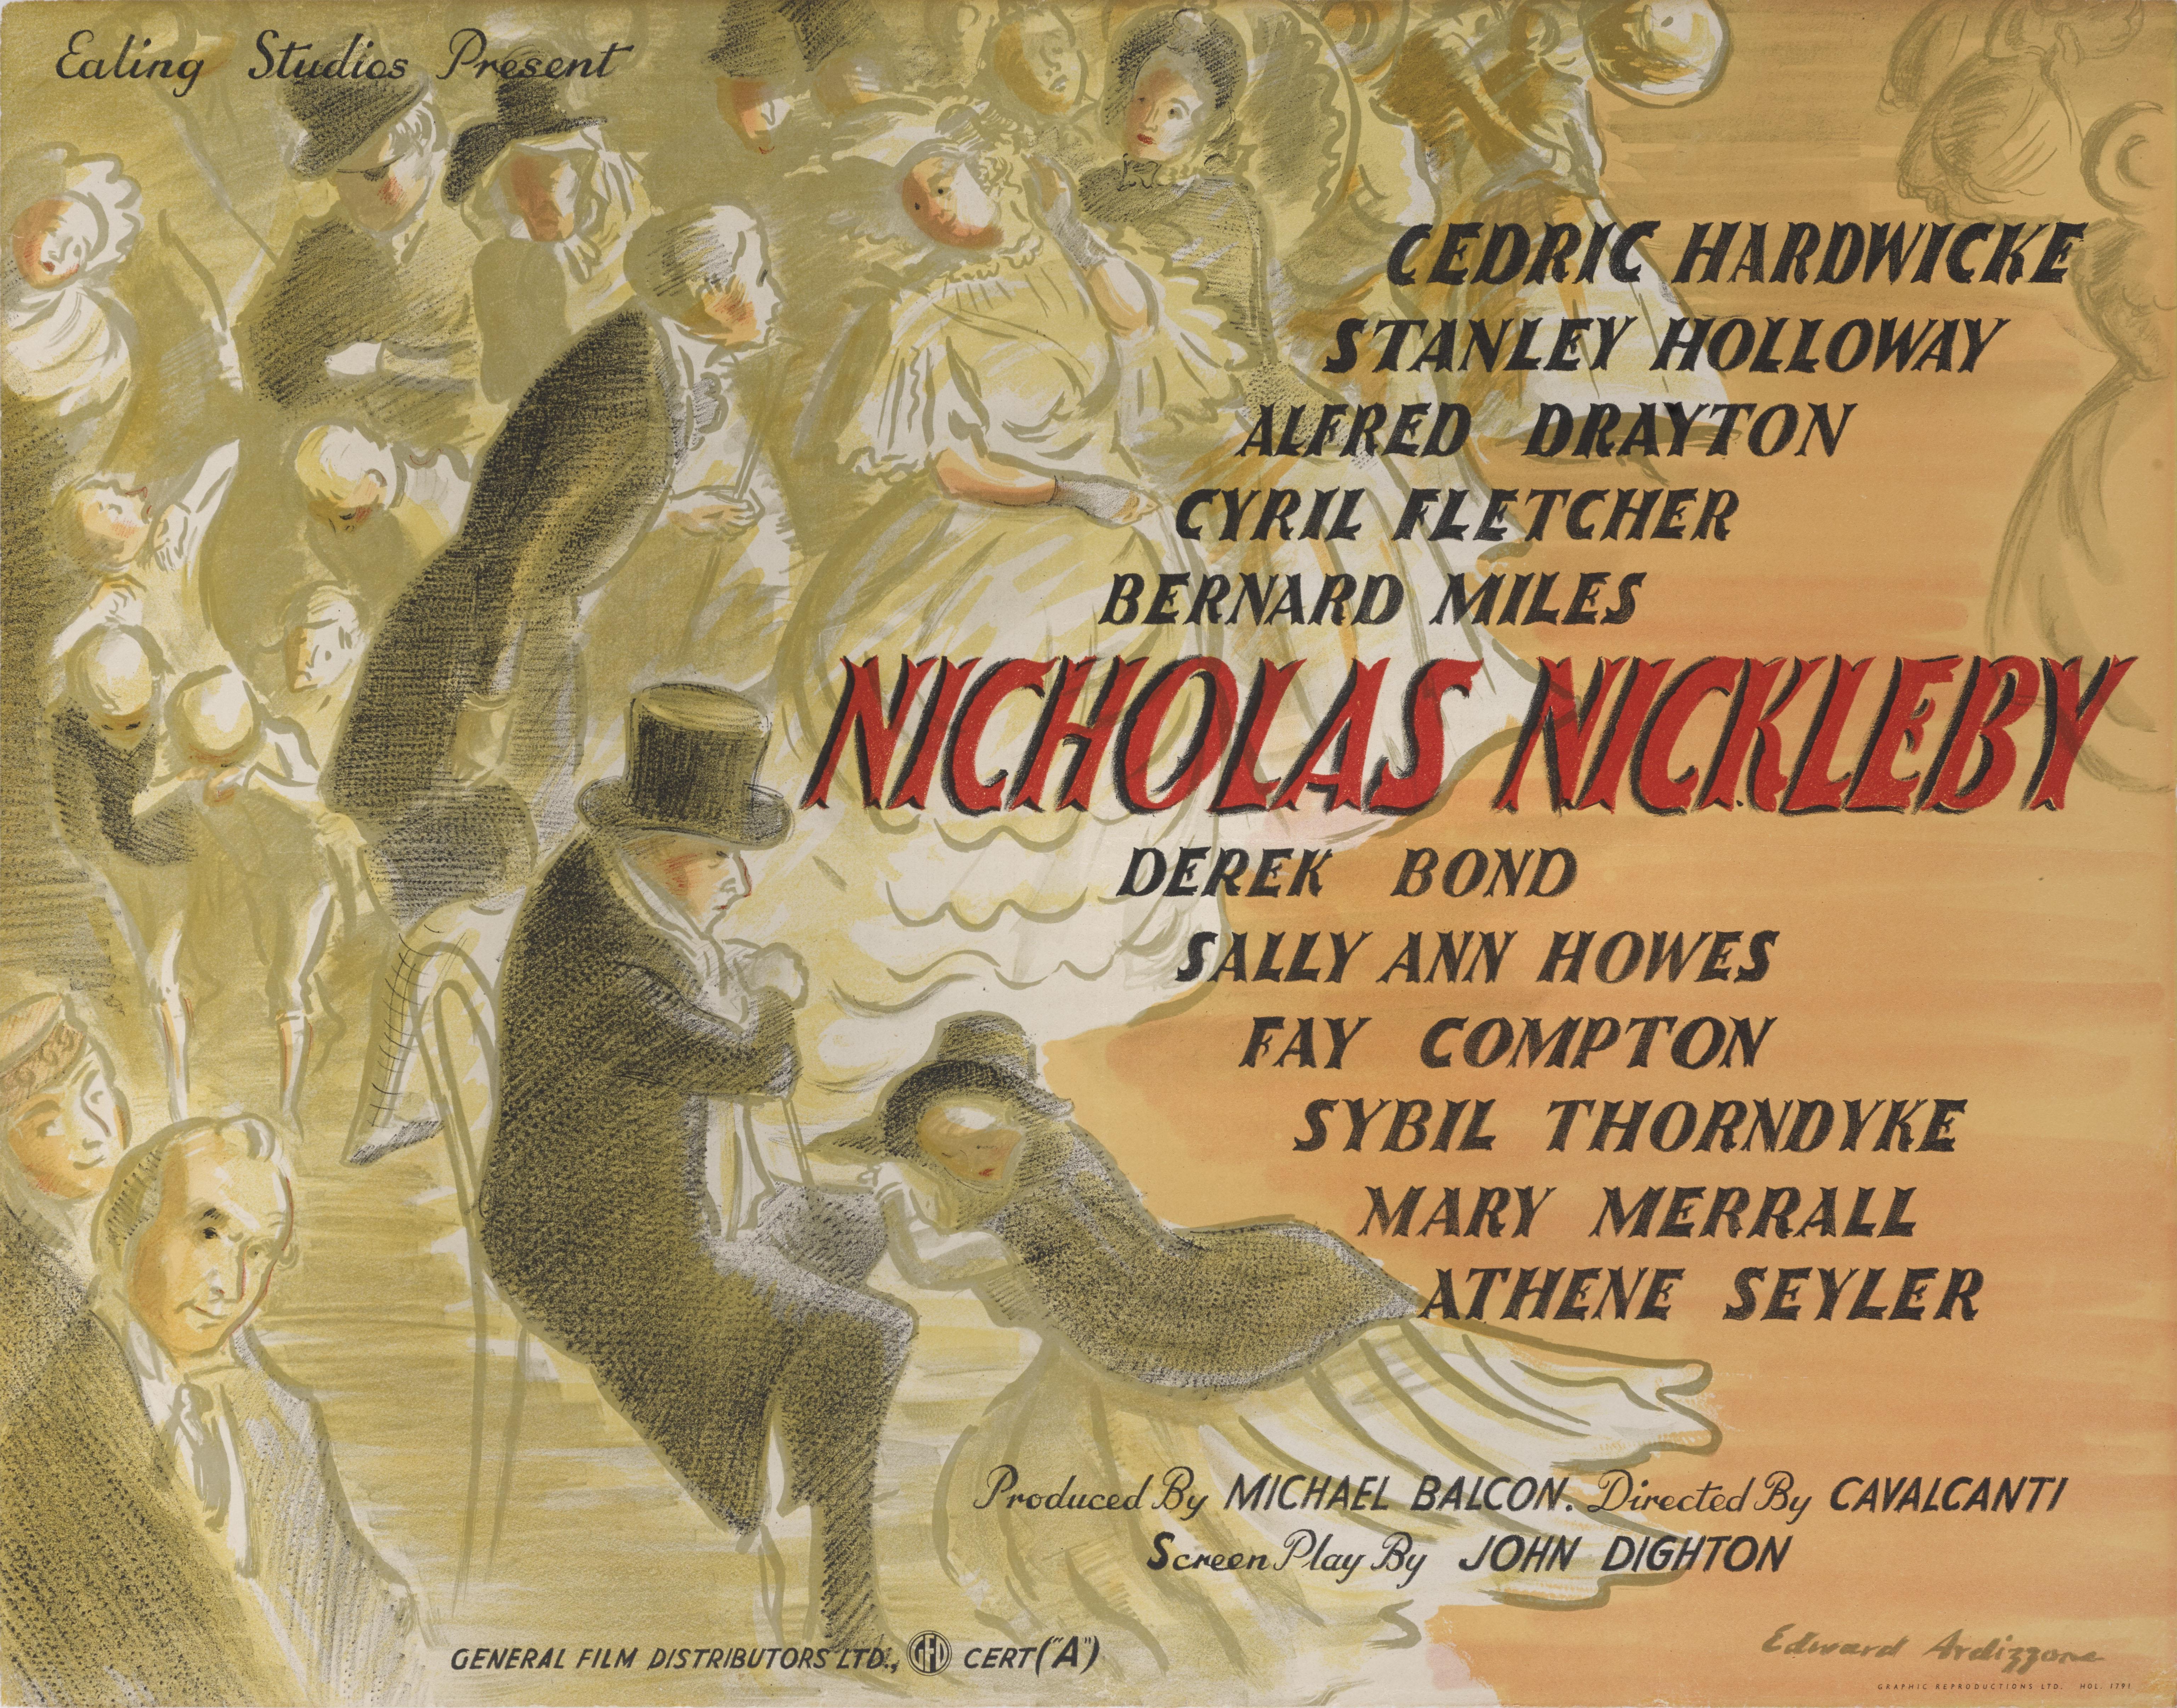 Original British film poster for the 1947 film The Life and Adventures of Nicholas Nickleby.
This British drama was directed by Alberto Cavalcanti, and stars Derek Bond, Cedric Hardwicke and Mary Merrall. The screenplay was based on the novel of